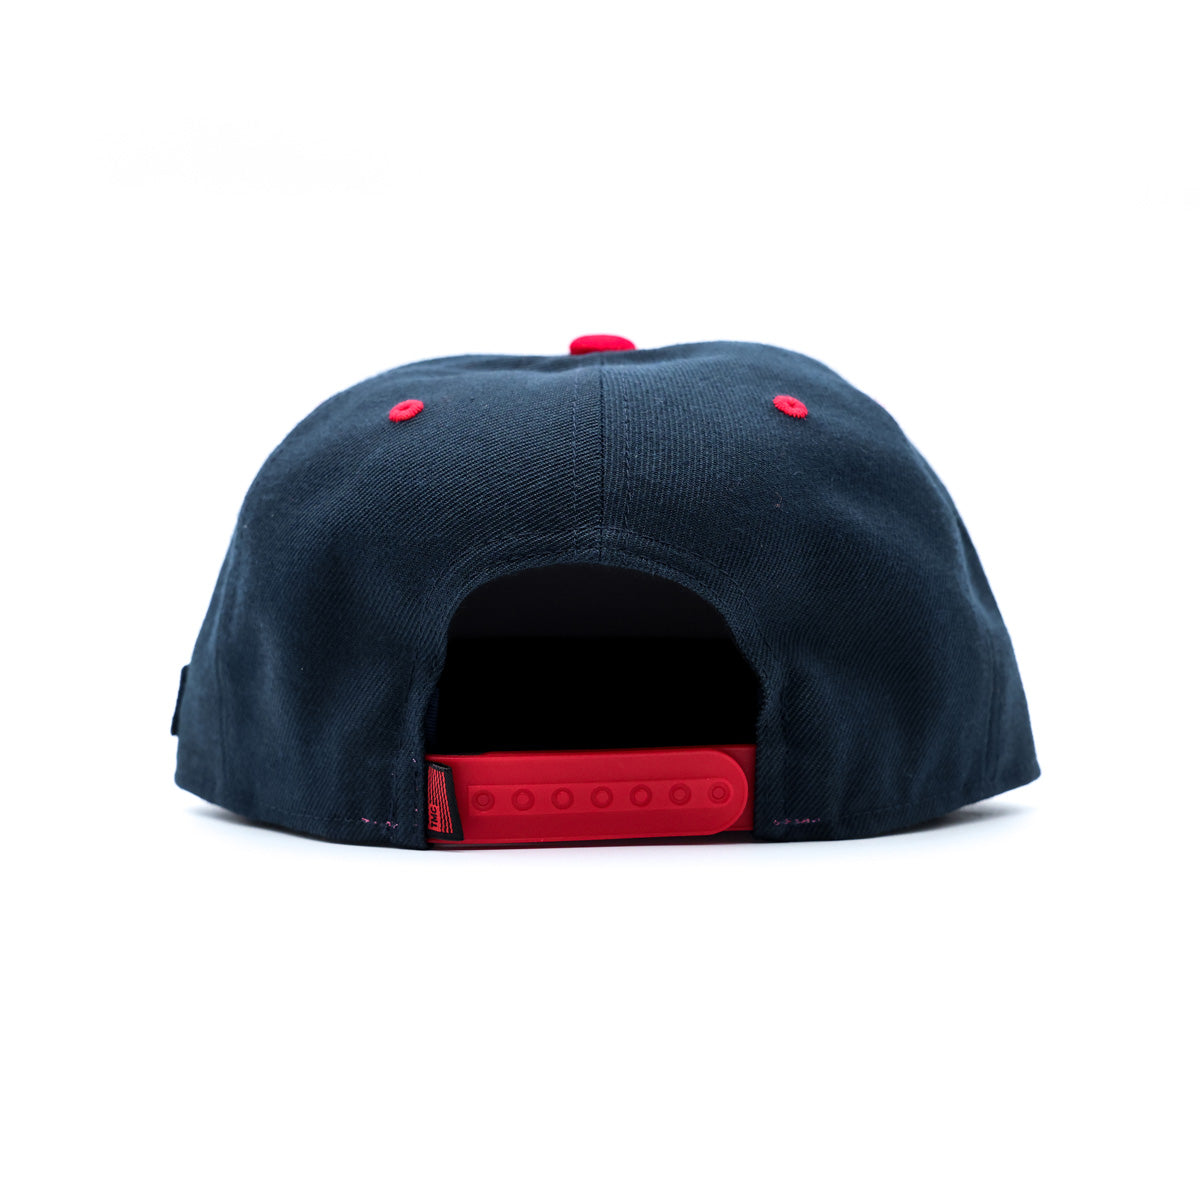 Crenshaw Limited Edition Snapback - Navy/Red [Two-Tone] - Back